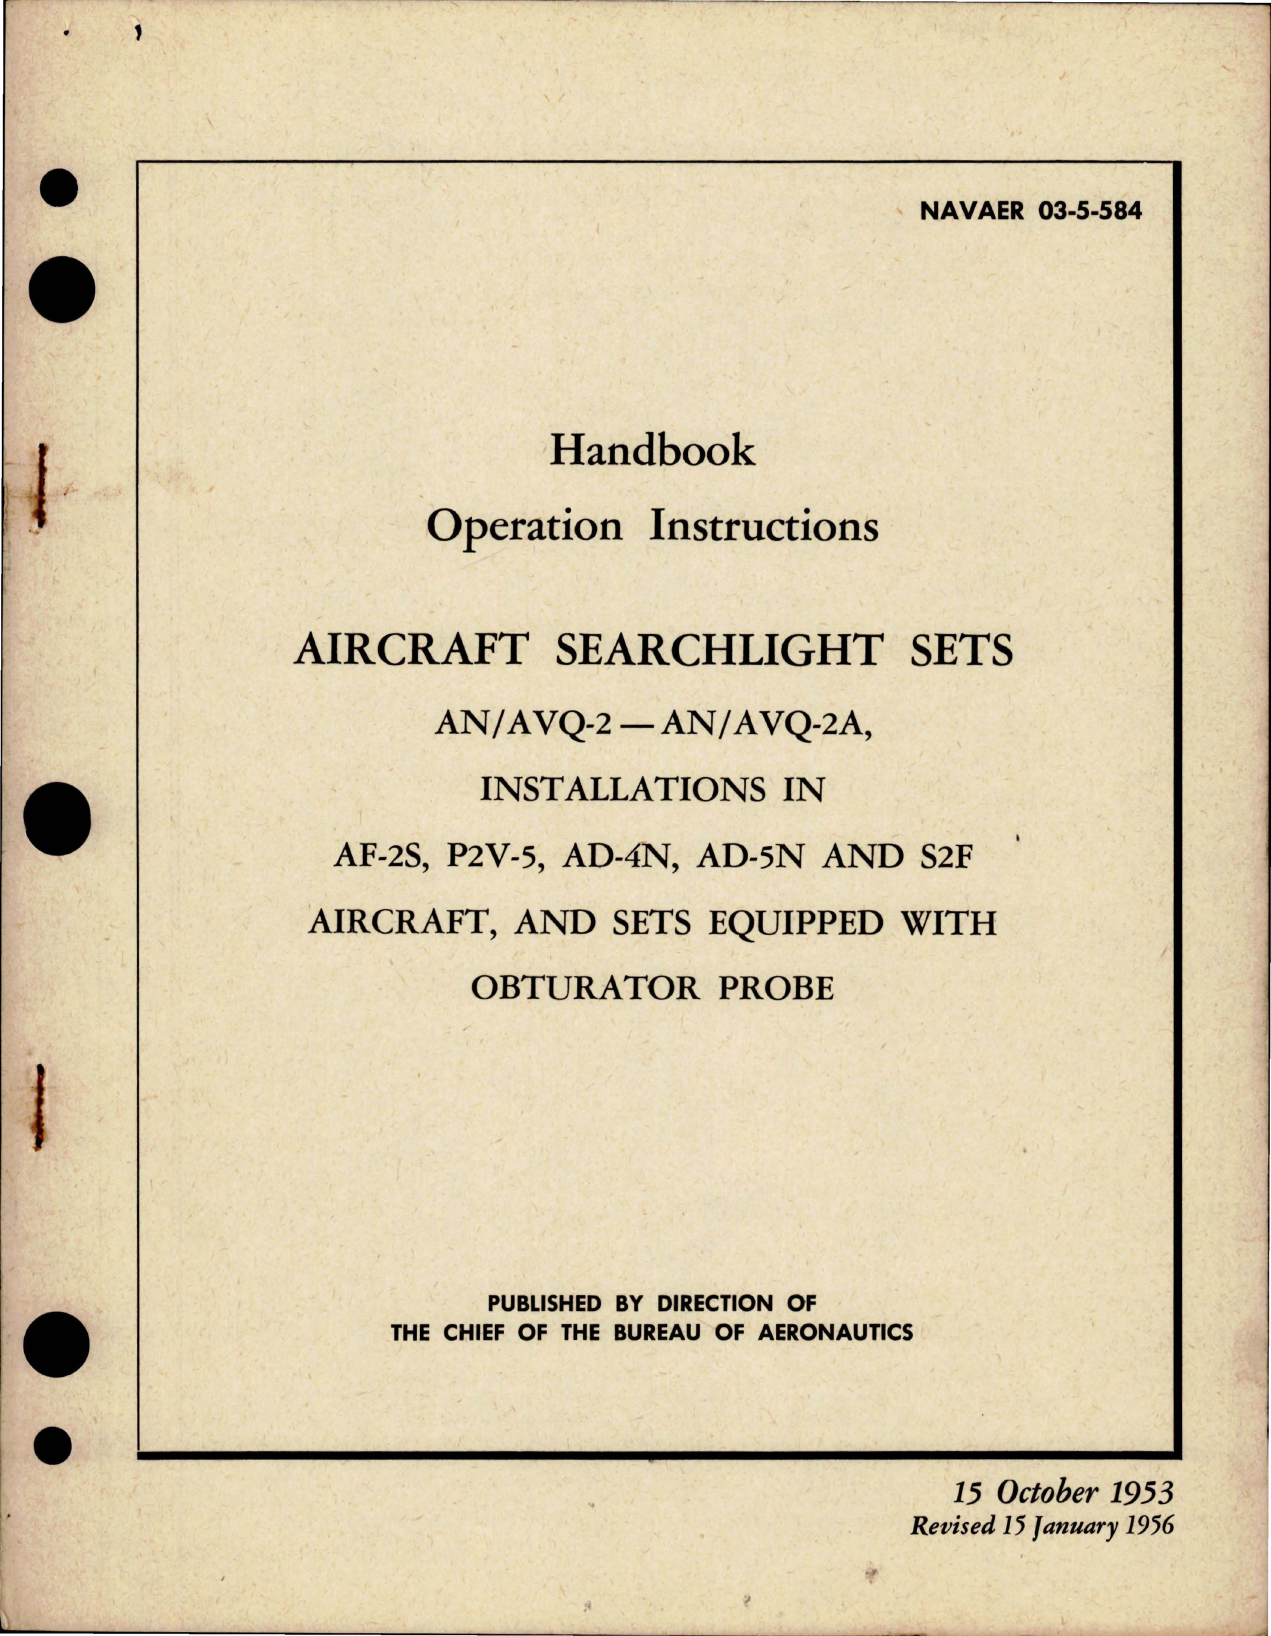 Sample page 1 from AirCorps Library document: Operation Instructions for Aircraft Searchlight Sets - AN-AVQ-2 and AN-AVQ-2A - Installations in AF-2S, P2V-5, AD-4N, AD-5N, and S2F